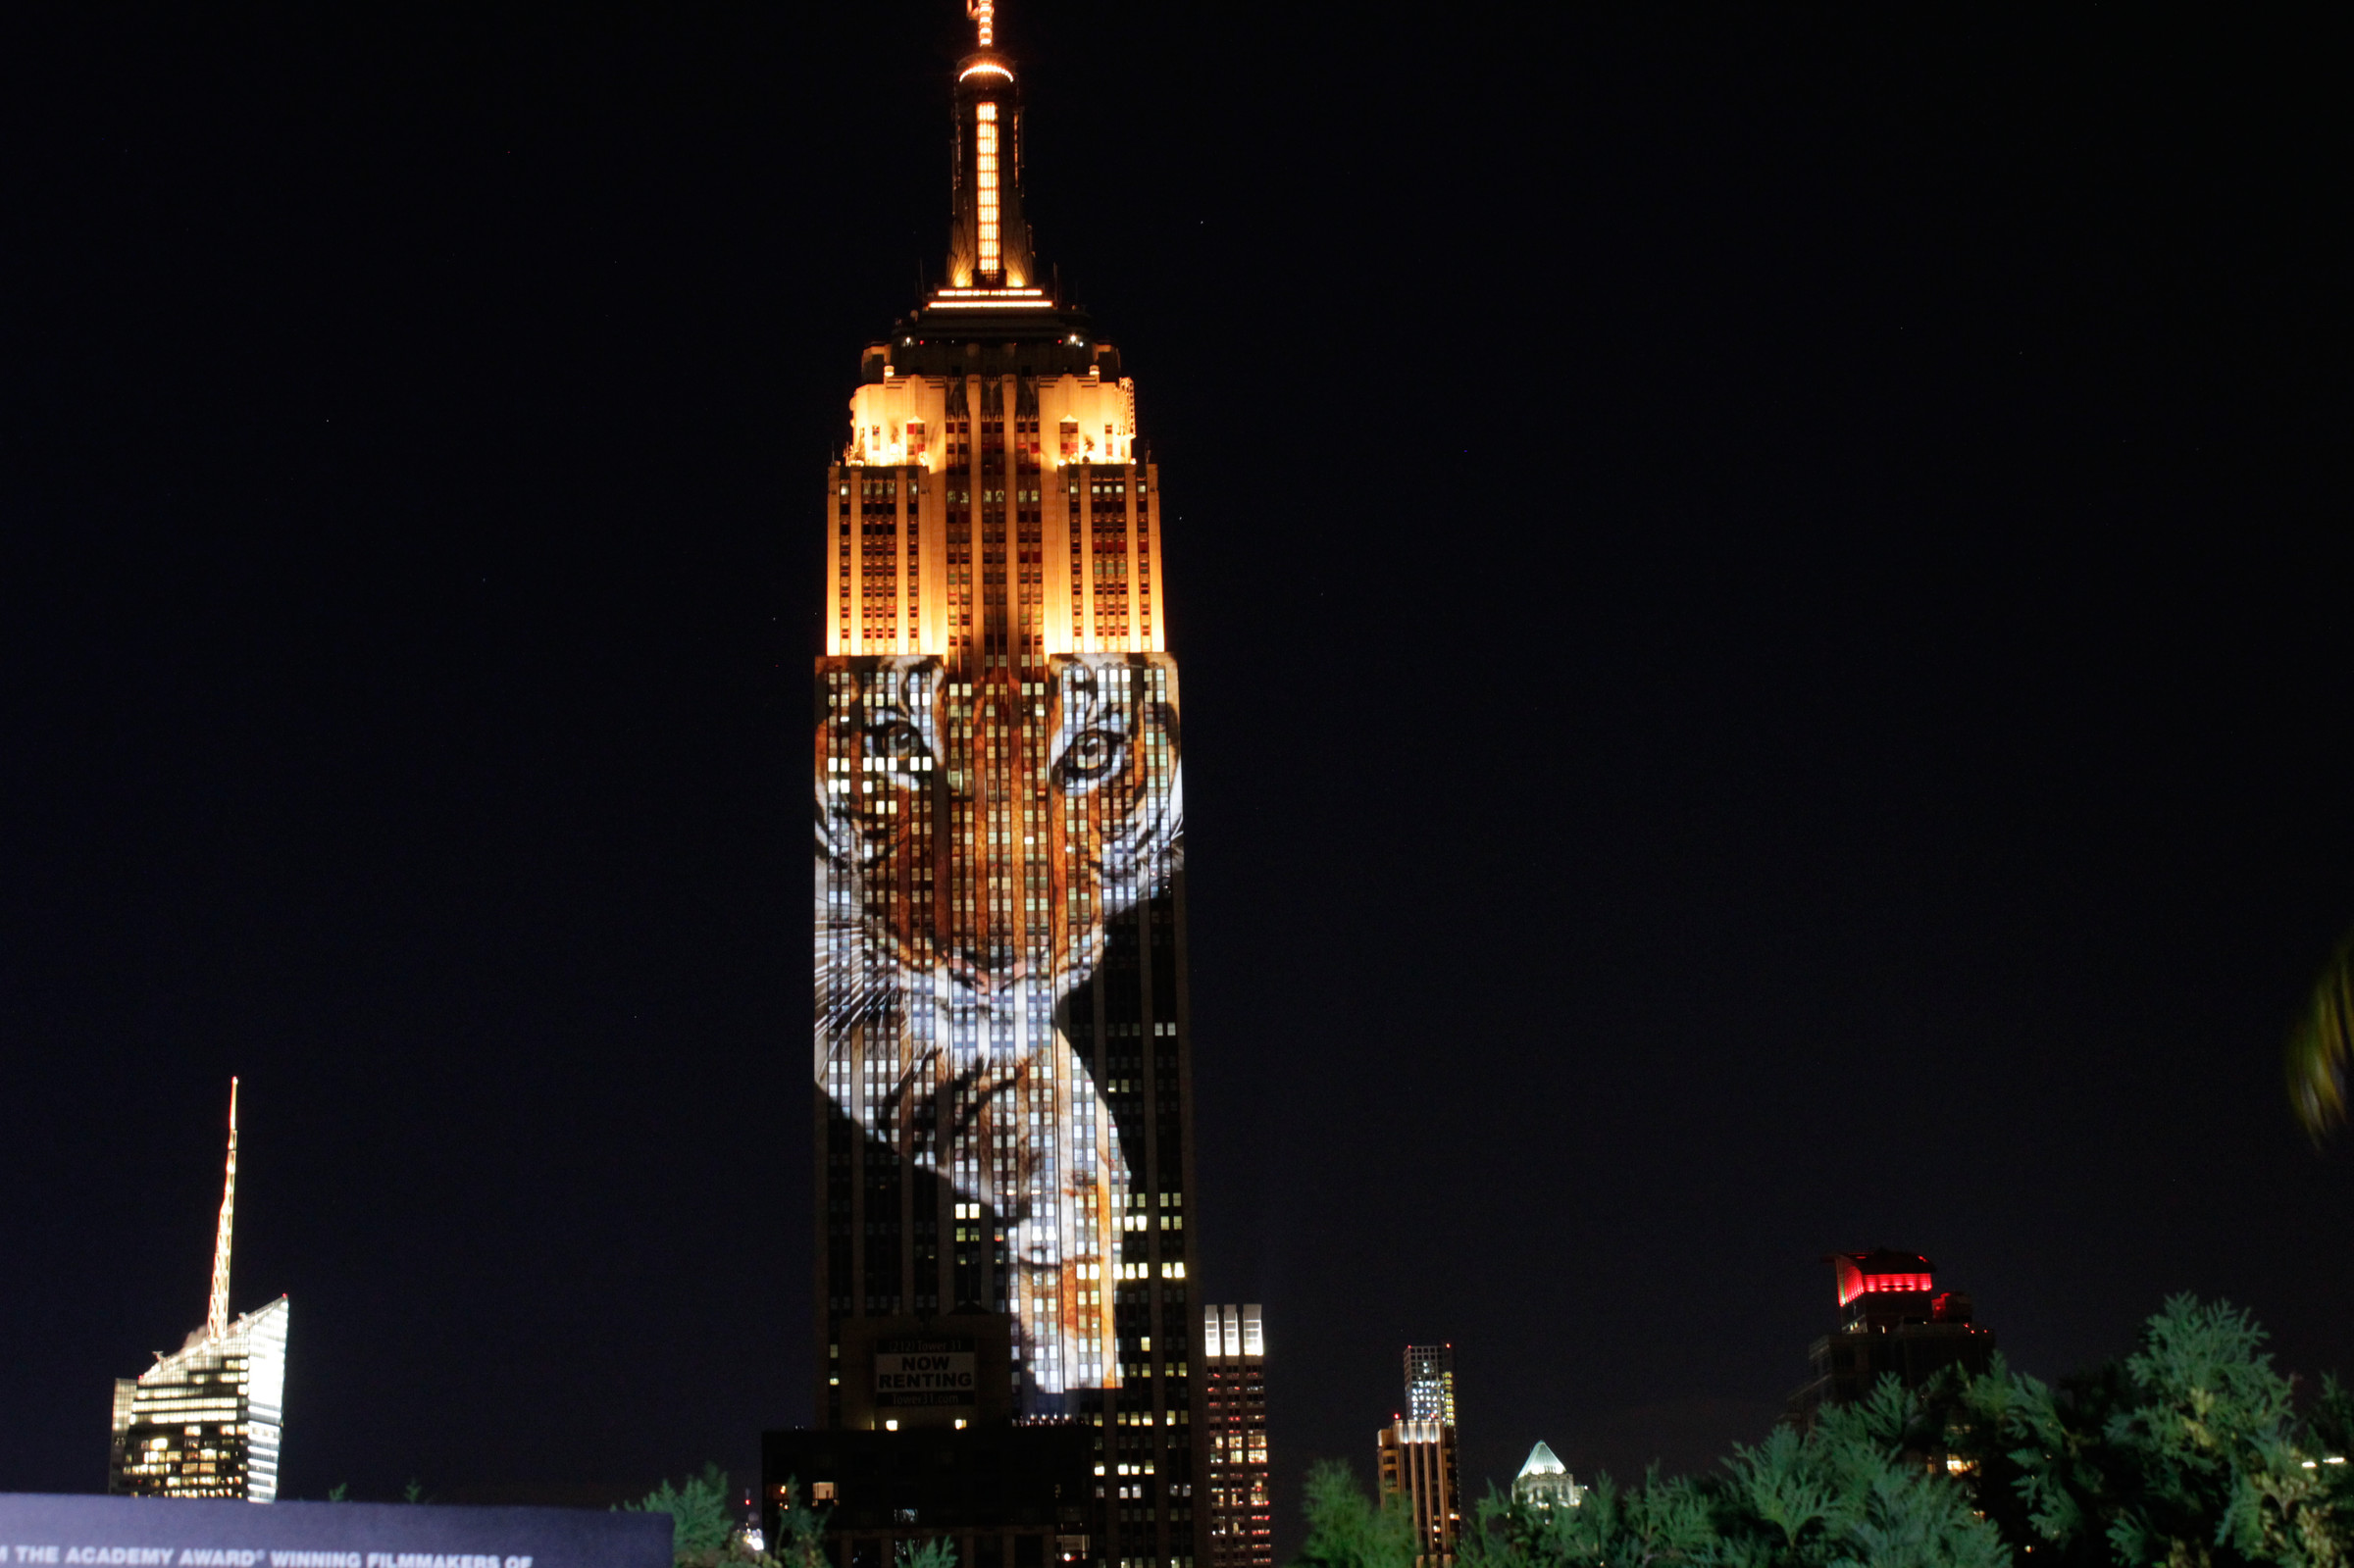 Watching endangered species illuminate the Empire State Building 